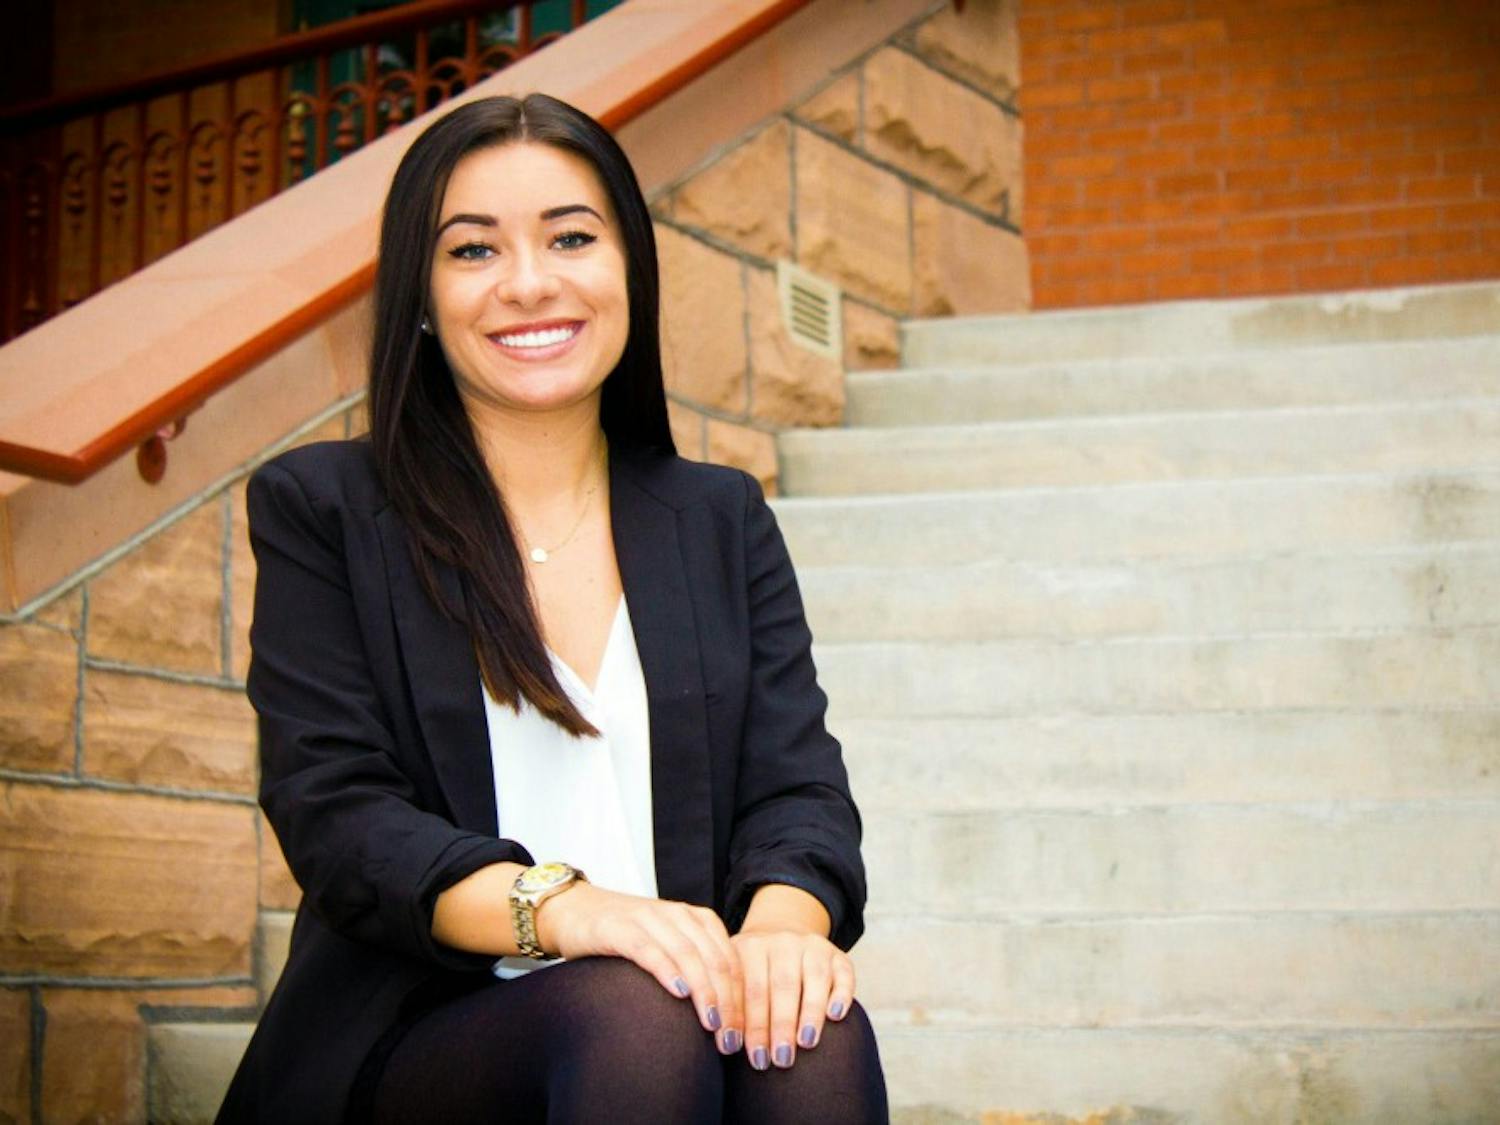 Justice Studies junior Caitlan Rocha poses for a portrait on the steps of Old Main on the ASU Tempe campus.